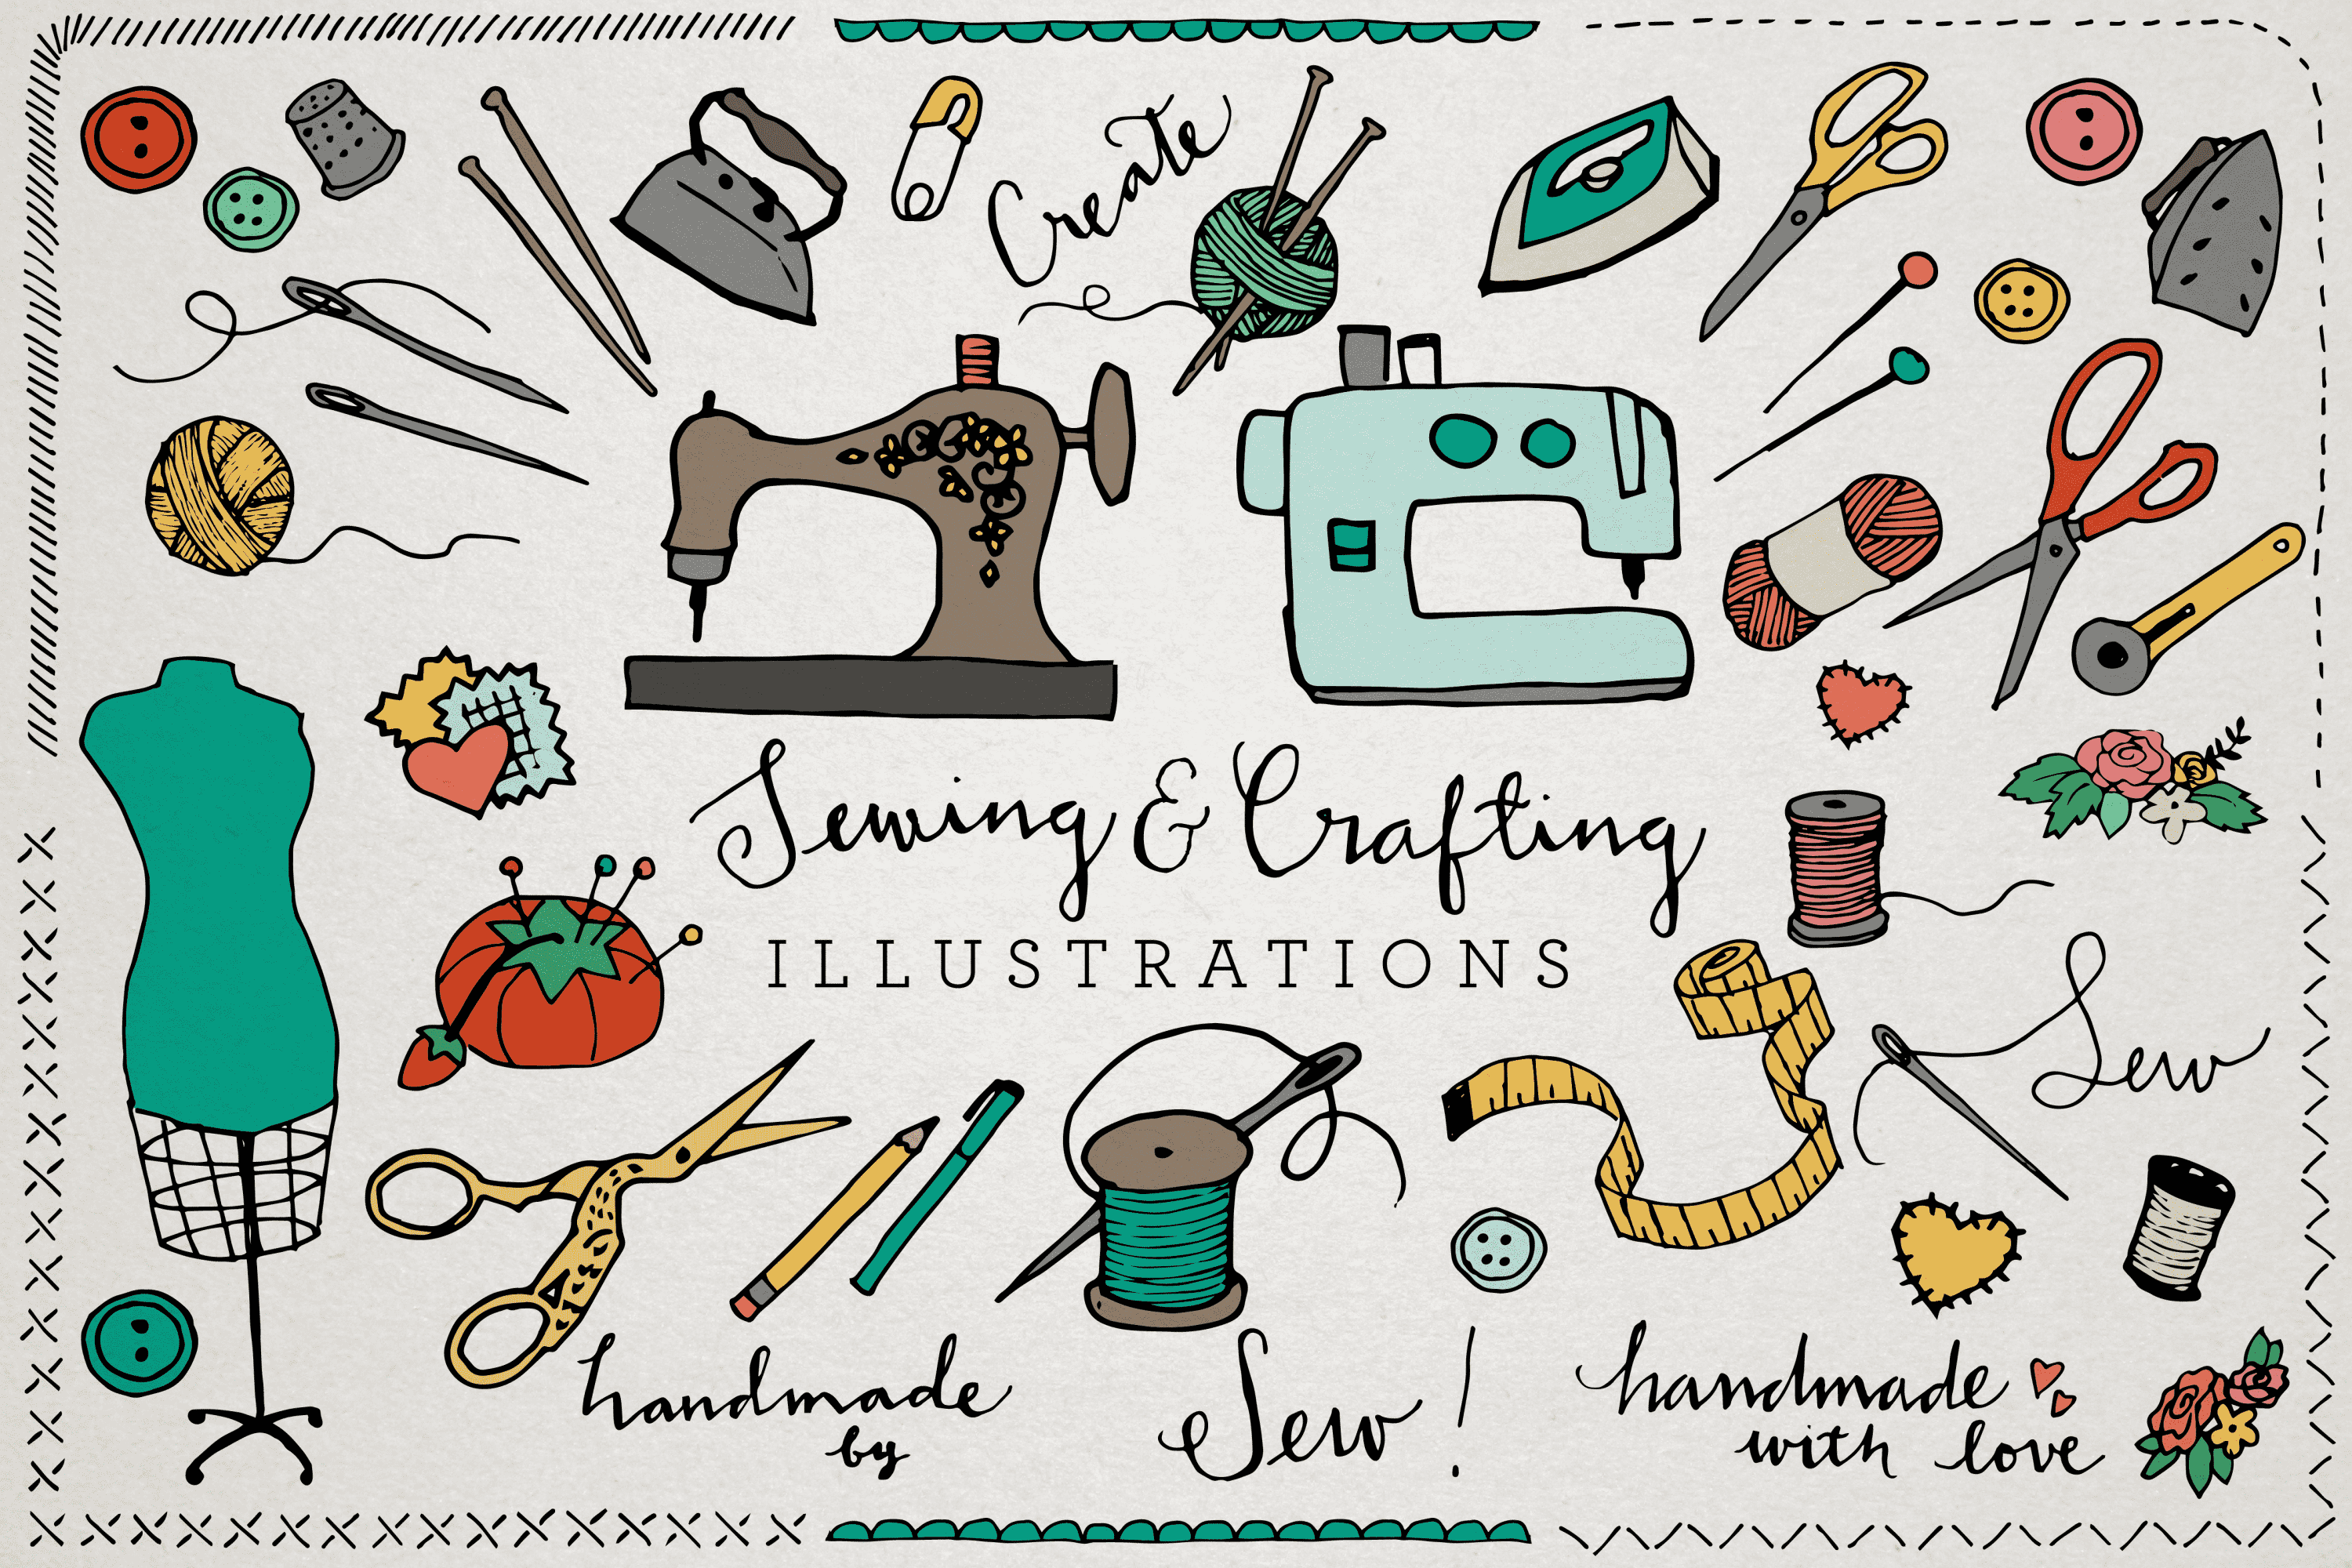 All necessary attributes for sewing and crafting.